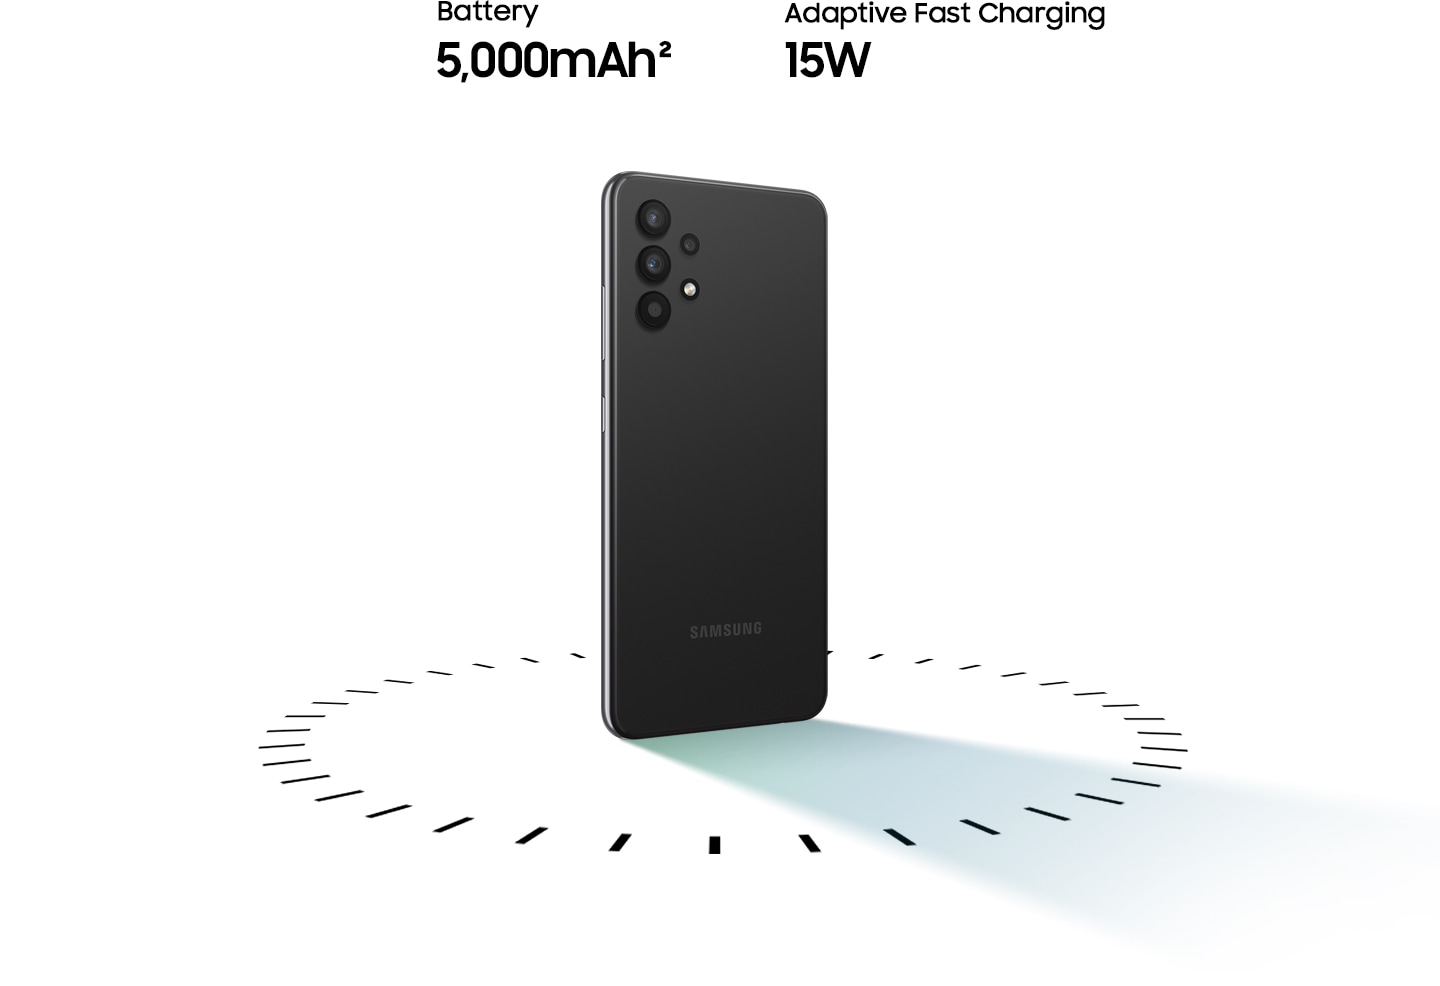 samsung a32 standing in the middle of circular dots, with the text of 5,000mAh Battery and 15W Adaptive Fast charging.